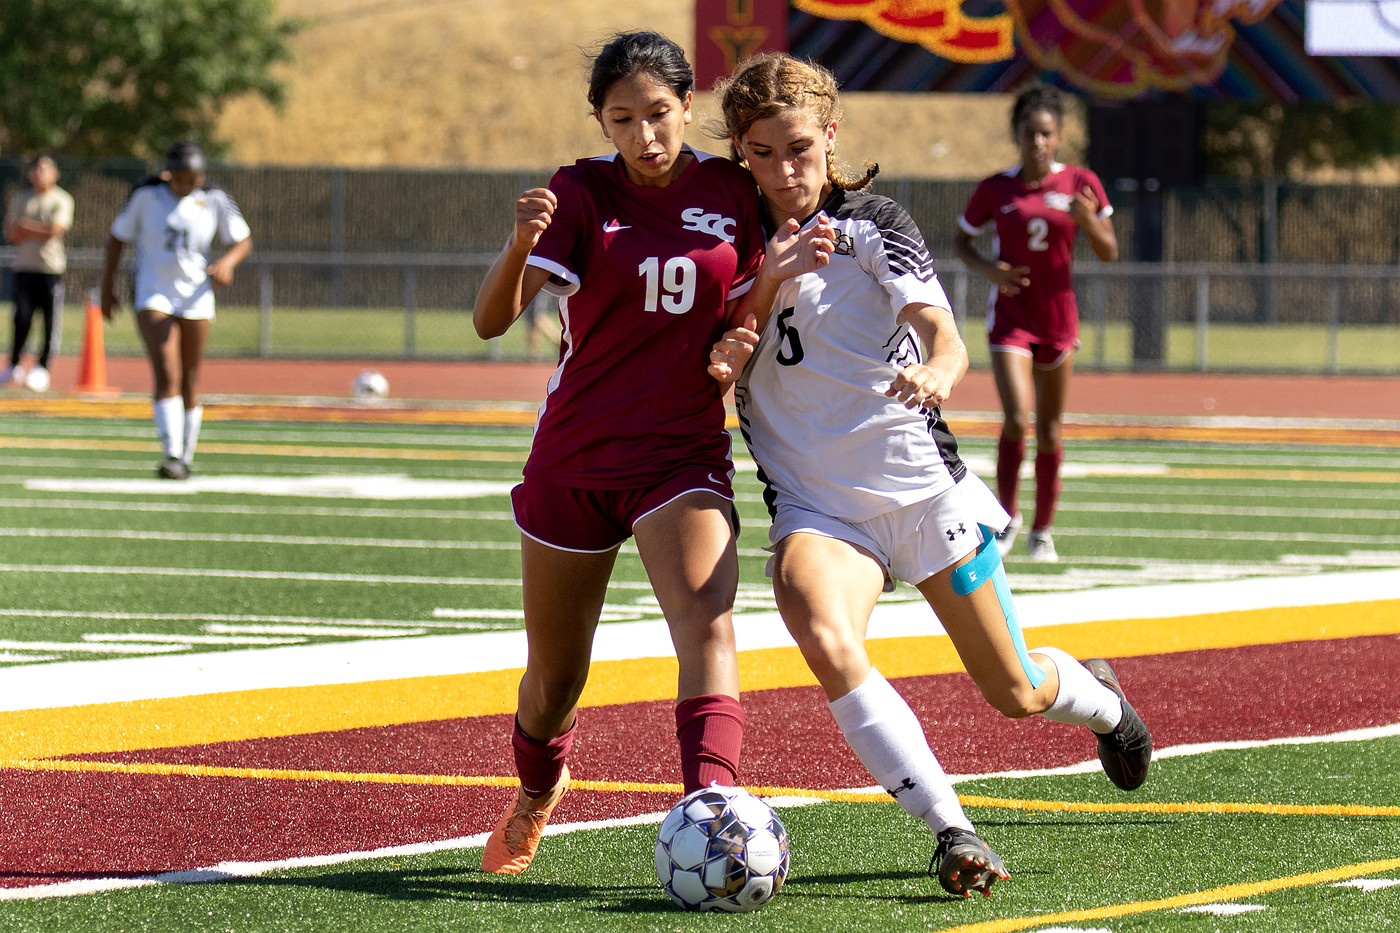 The Panthers open up Conference play at American River as the host Beavers pull away to win 4-2